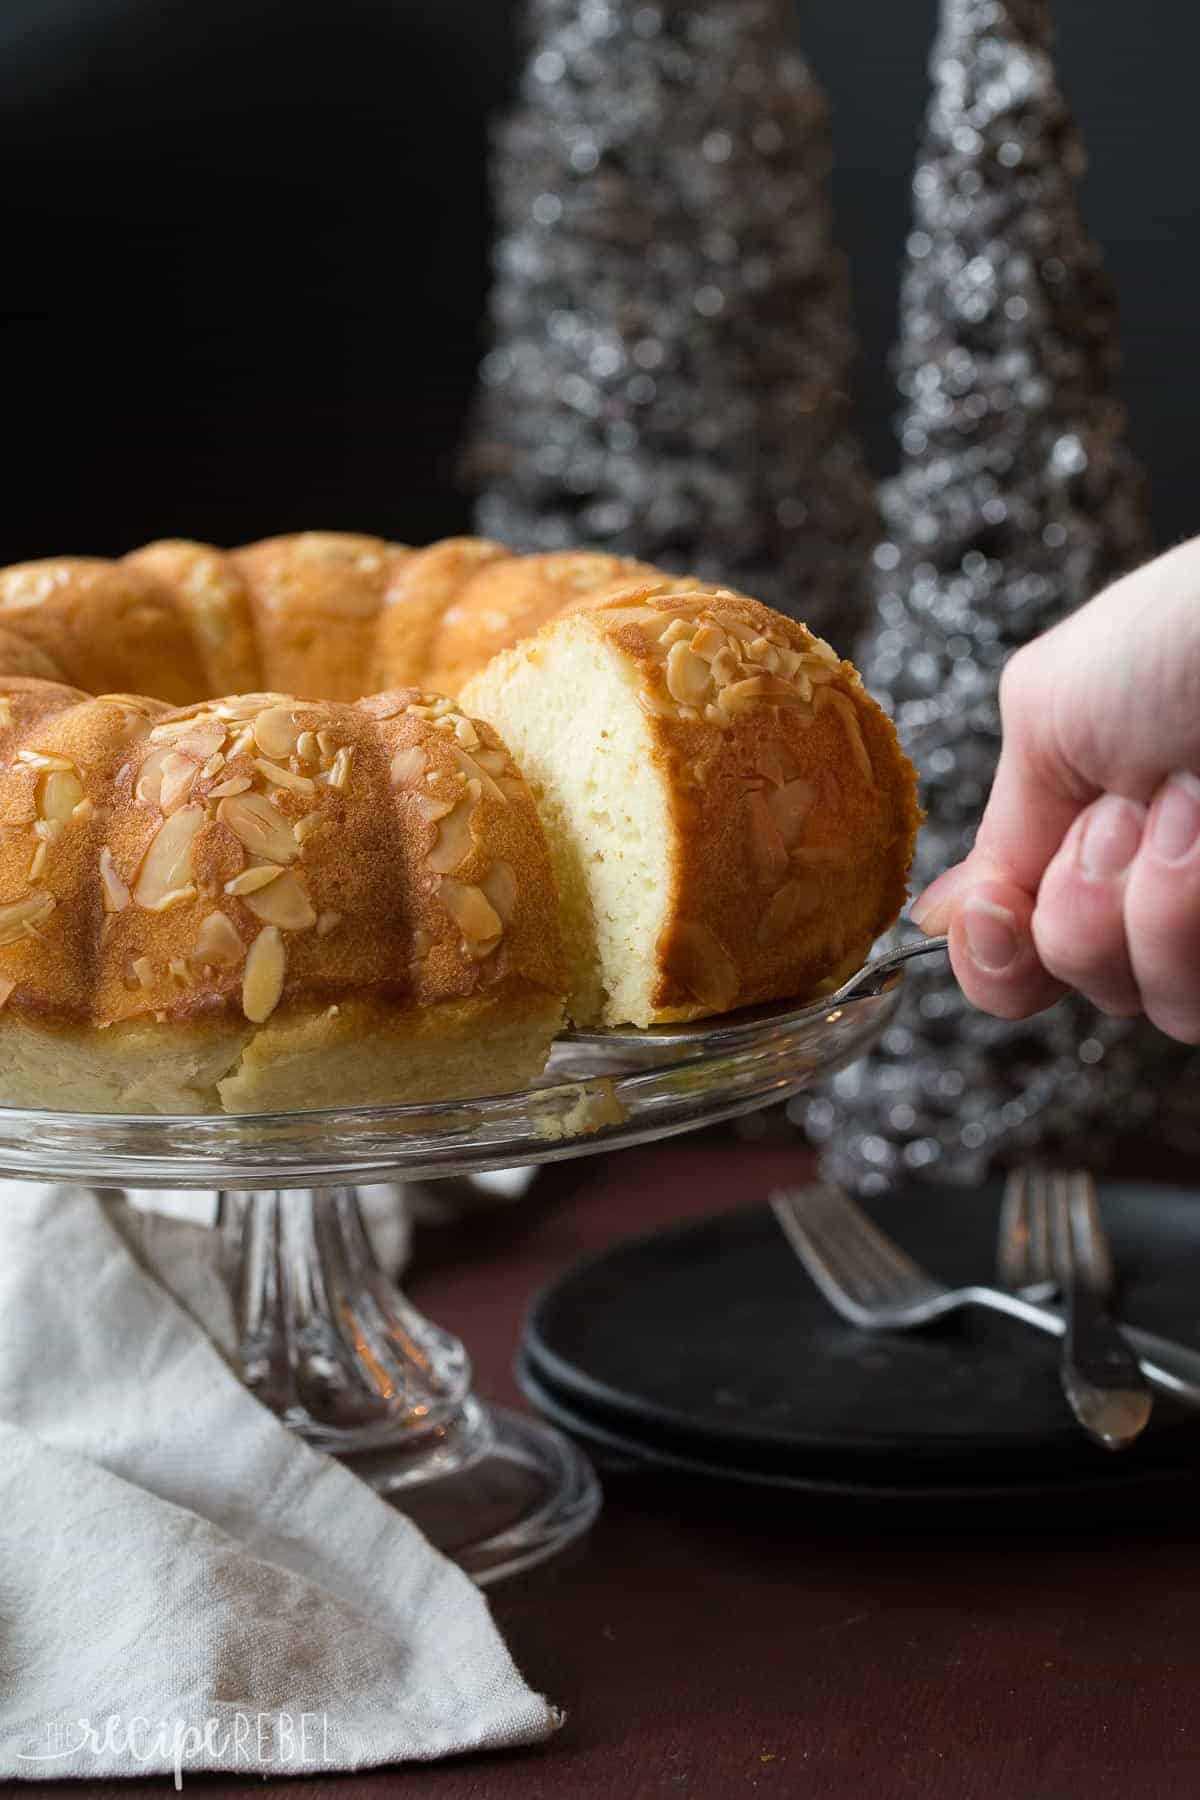 slice of almond pound cake being pulled out of the whole on the glass cake plate